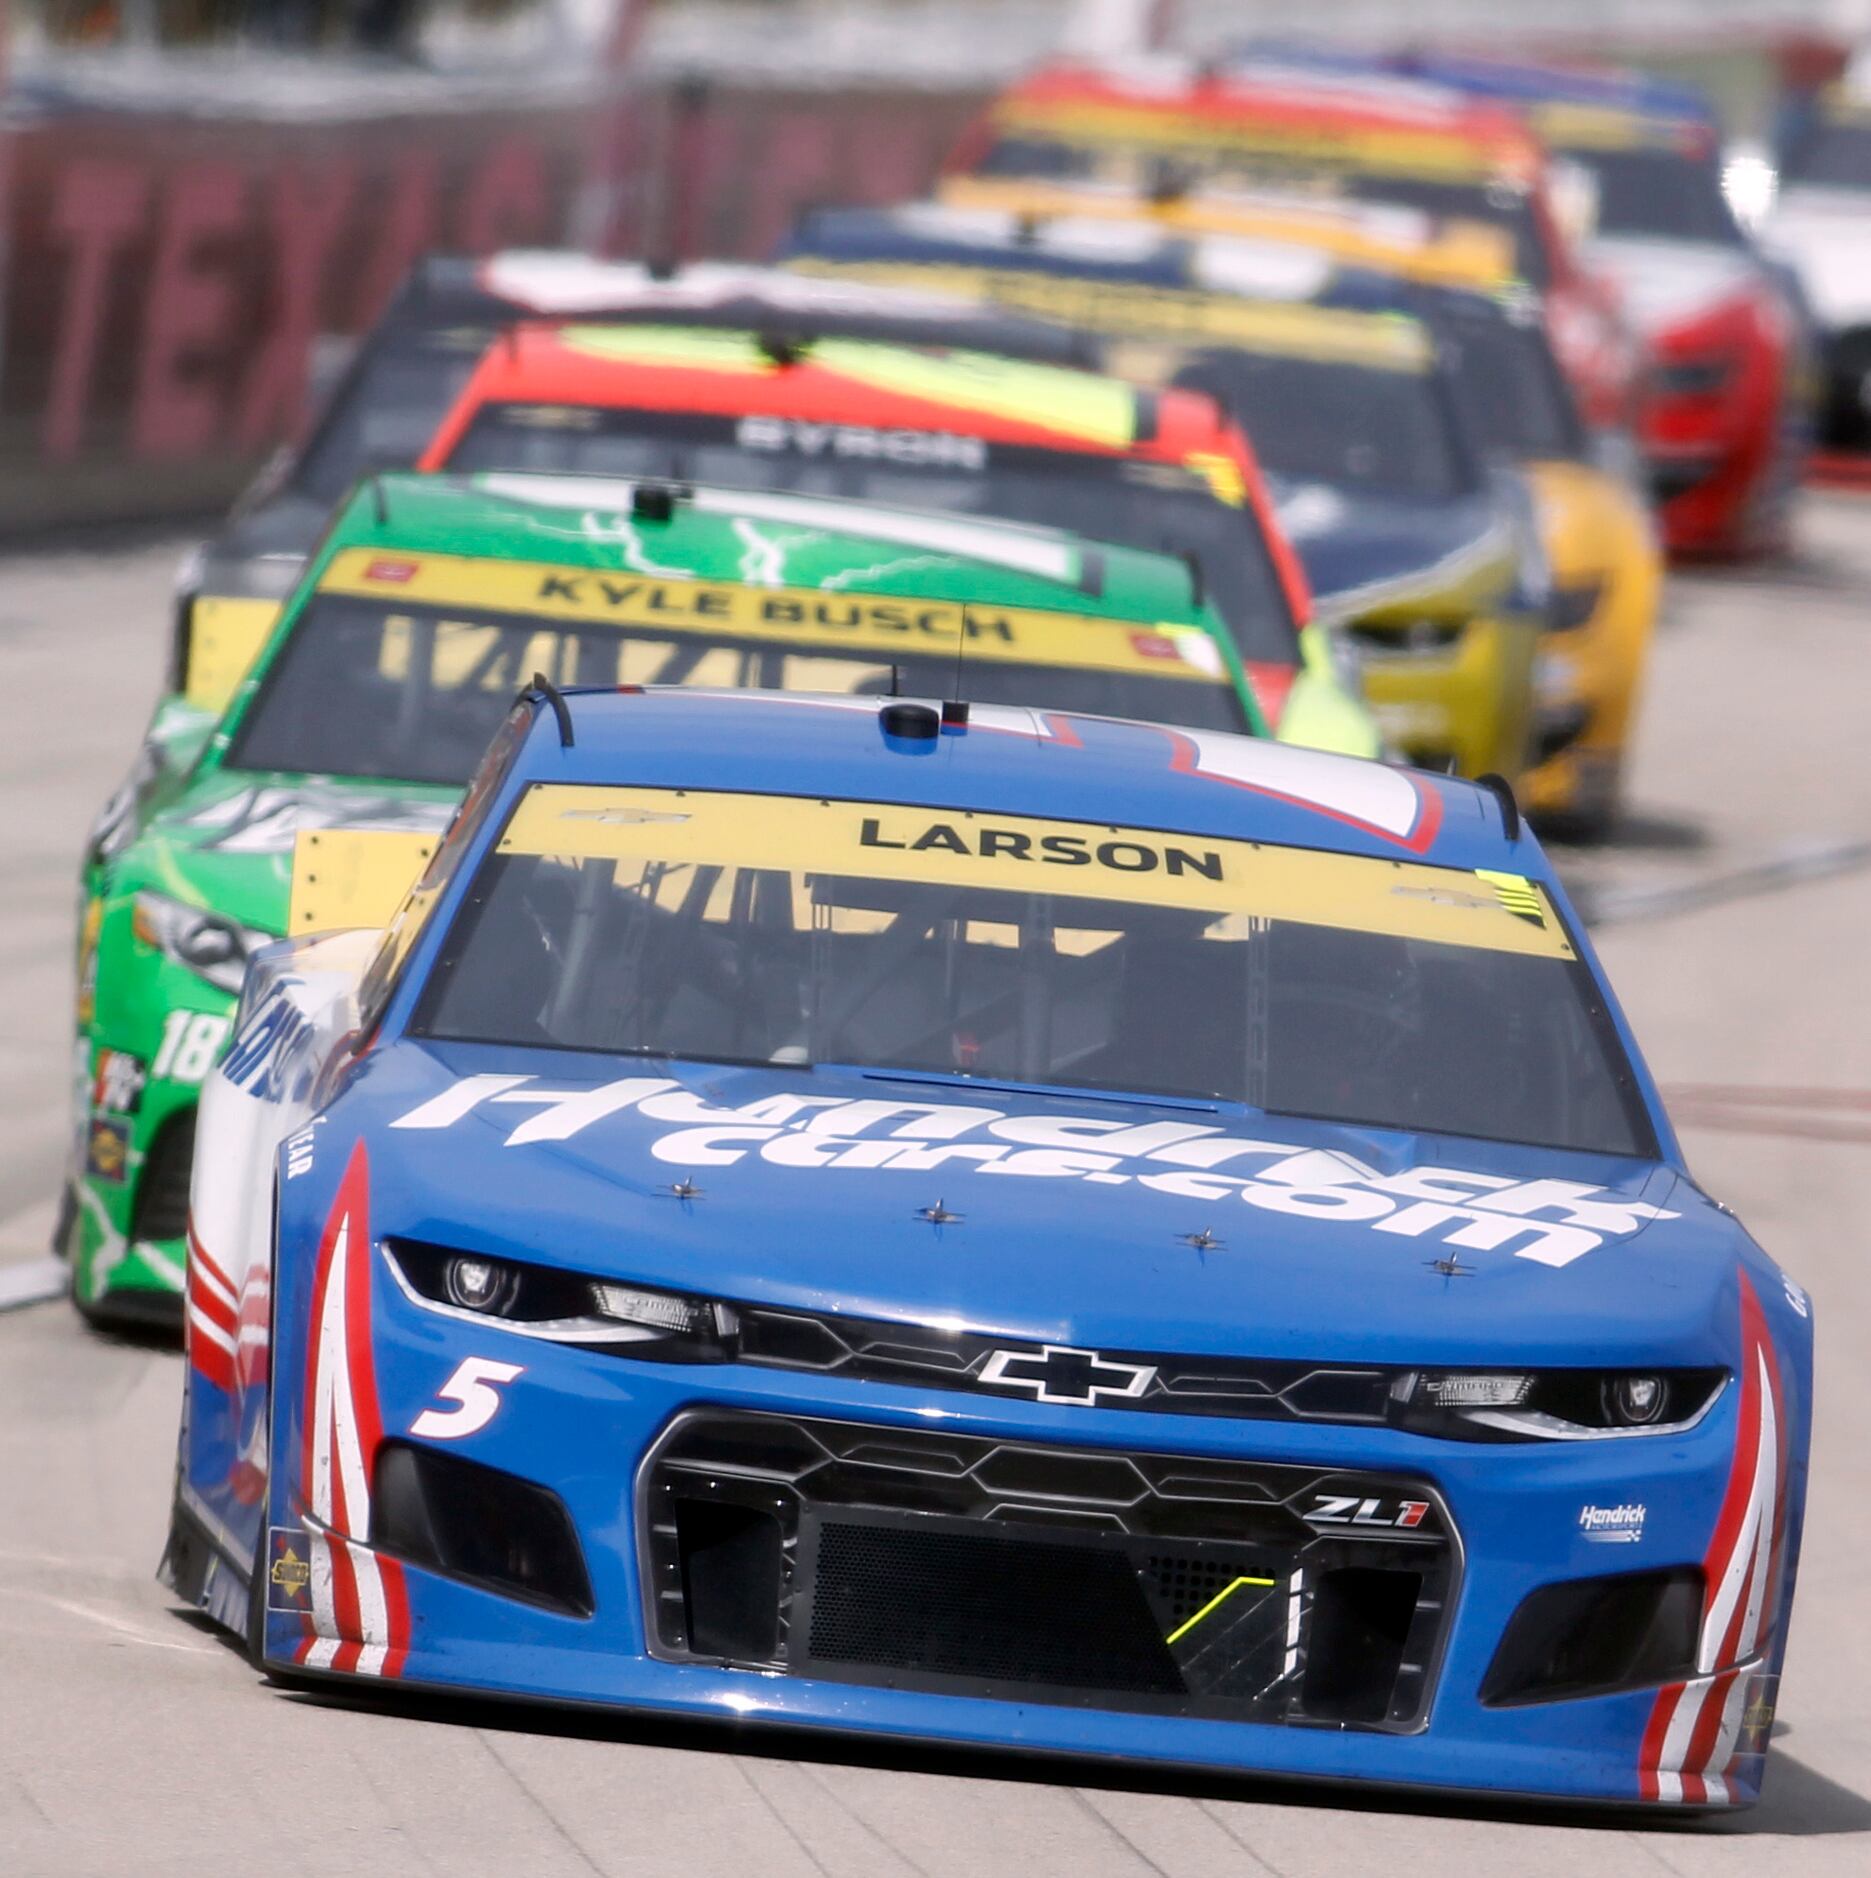 Driver Kyle Larson leads the pack coming out of a re-start in the 2nd stage of the race from...